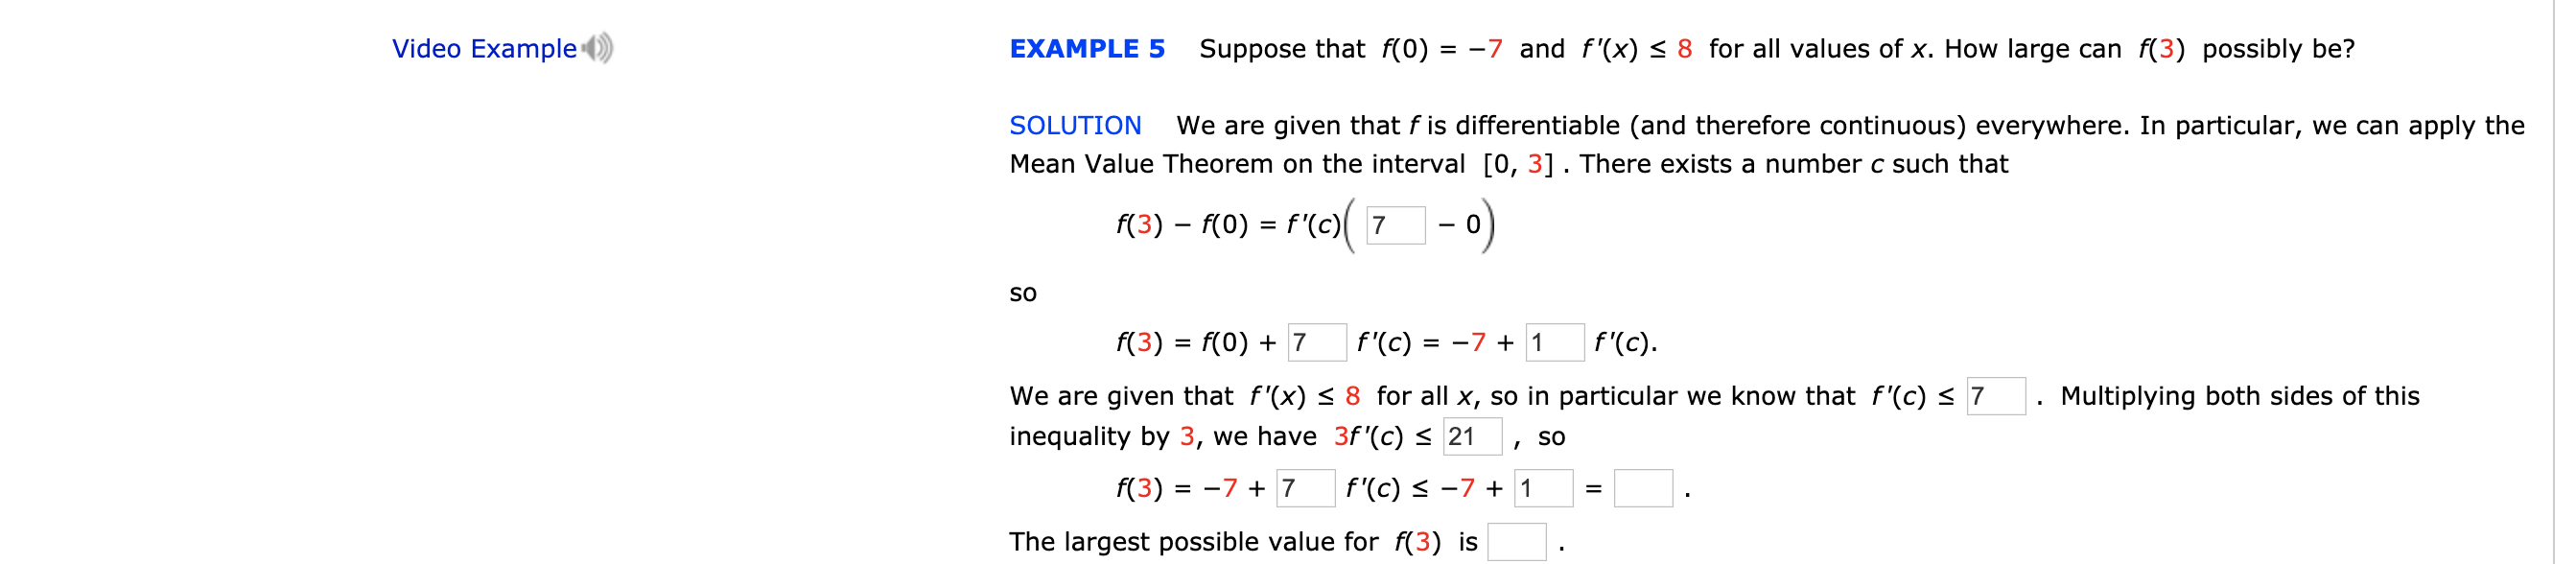 Video Example
Suppose that f(0) = -7 and f'(x) < 8 for all values of x. How large can f(3) possibly be?
EXAMPLE 5
SOLUTION
We are given that f is differentiable (and therefore continuous) everywhere. In particular, we can apply the
Mean Value Theorem on the interval [0, 3] . There exists a number c such that
f(3) f(0) f '(c)7
-0
=
SO
f(3) f(0)7
f '(c) = -7 + 1
f'(c)
We are given that f'(x) < 8 for all x, so in particular we know that f'(c) 7
Multiplying both sides of this
inequality by 3, we have 3f '(c) 21
SO
f(3) = -7 +7
f'(c) -7 1
The largest possible value for f(3) is
